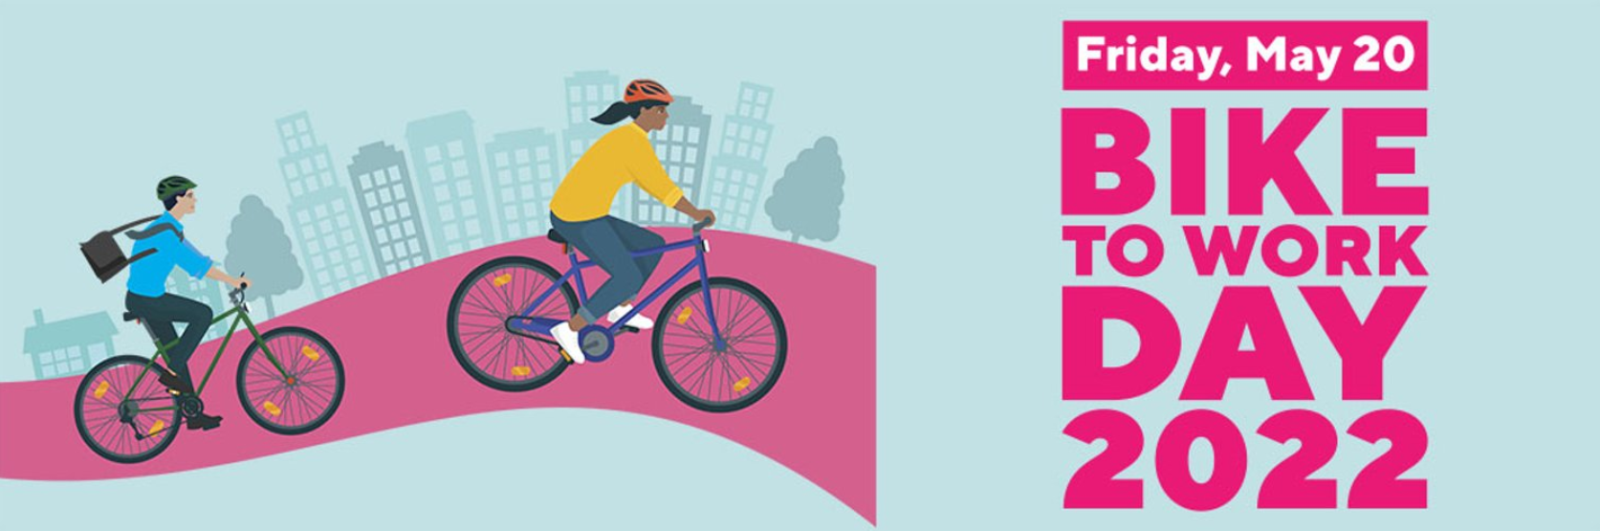 Register HERE for Bike To Work Day on May 20th! 